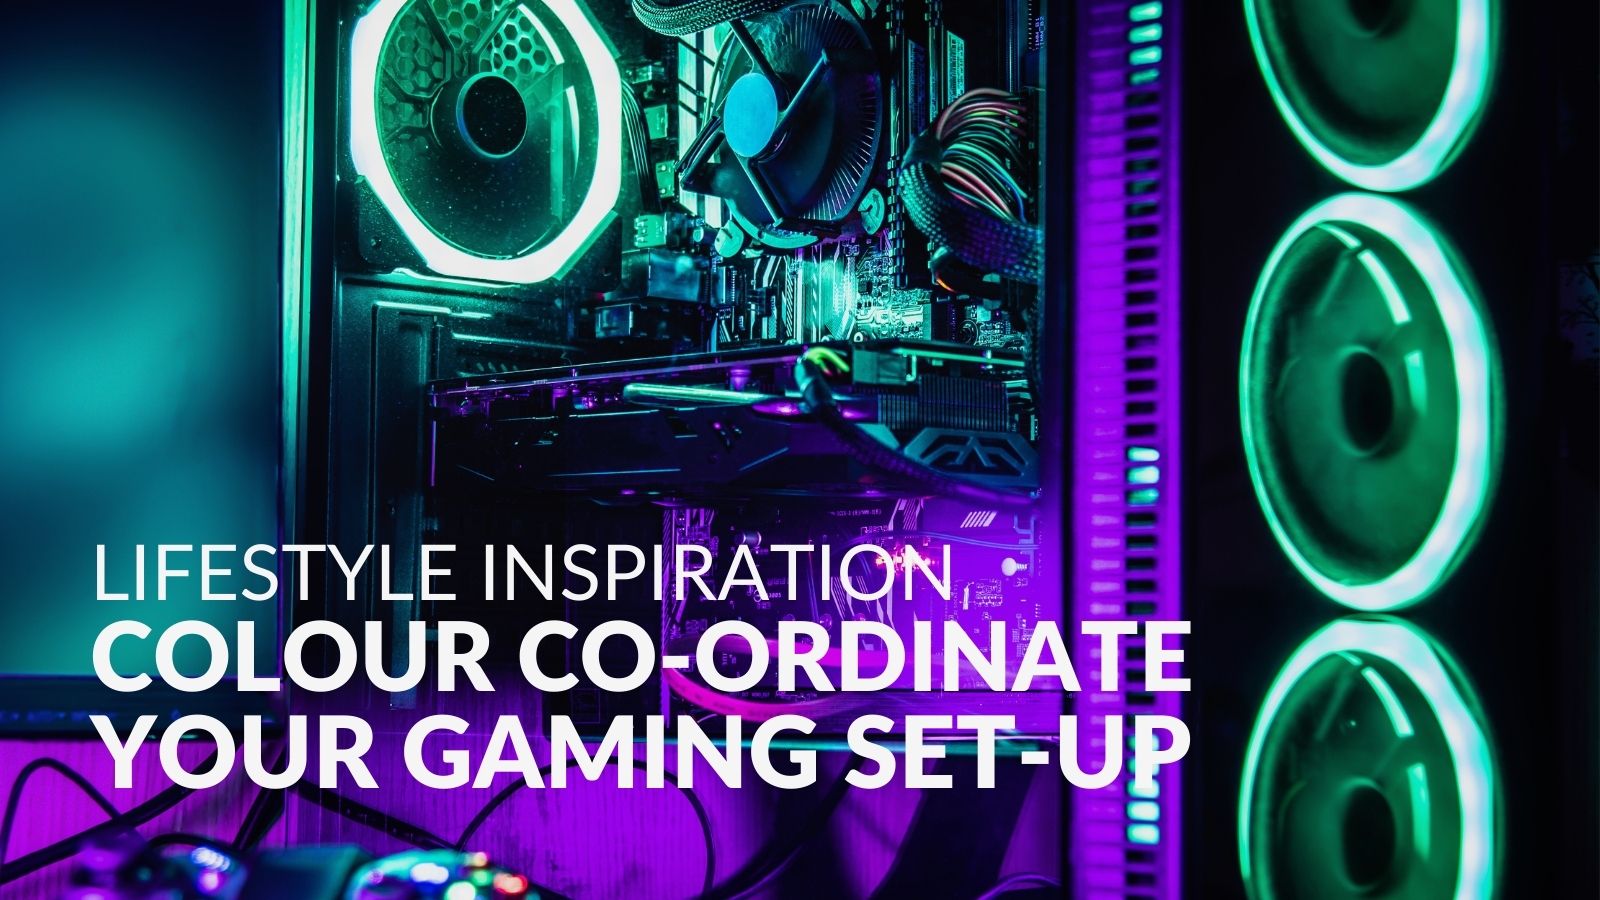 Lifestyle Inspiration: Colour Co-ordinate Your Gaming Set-up